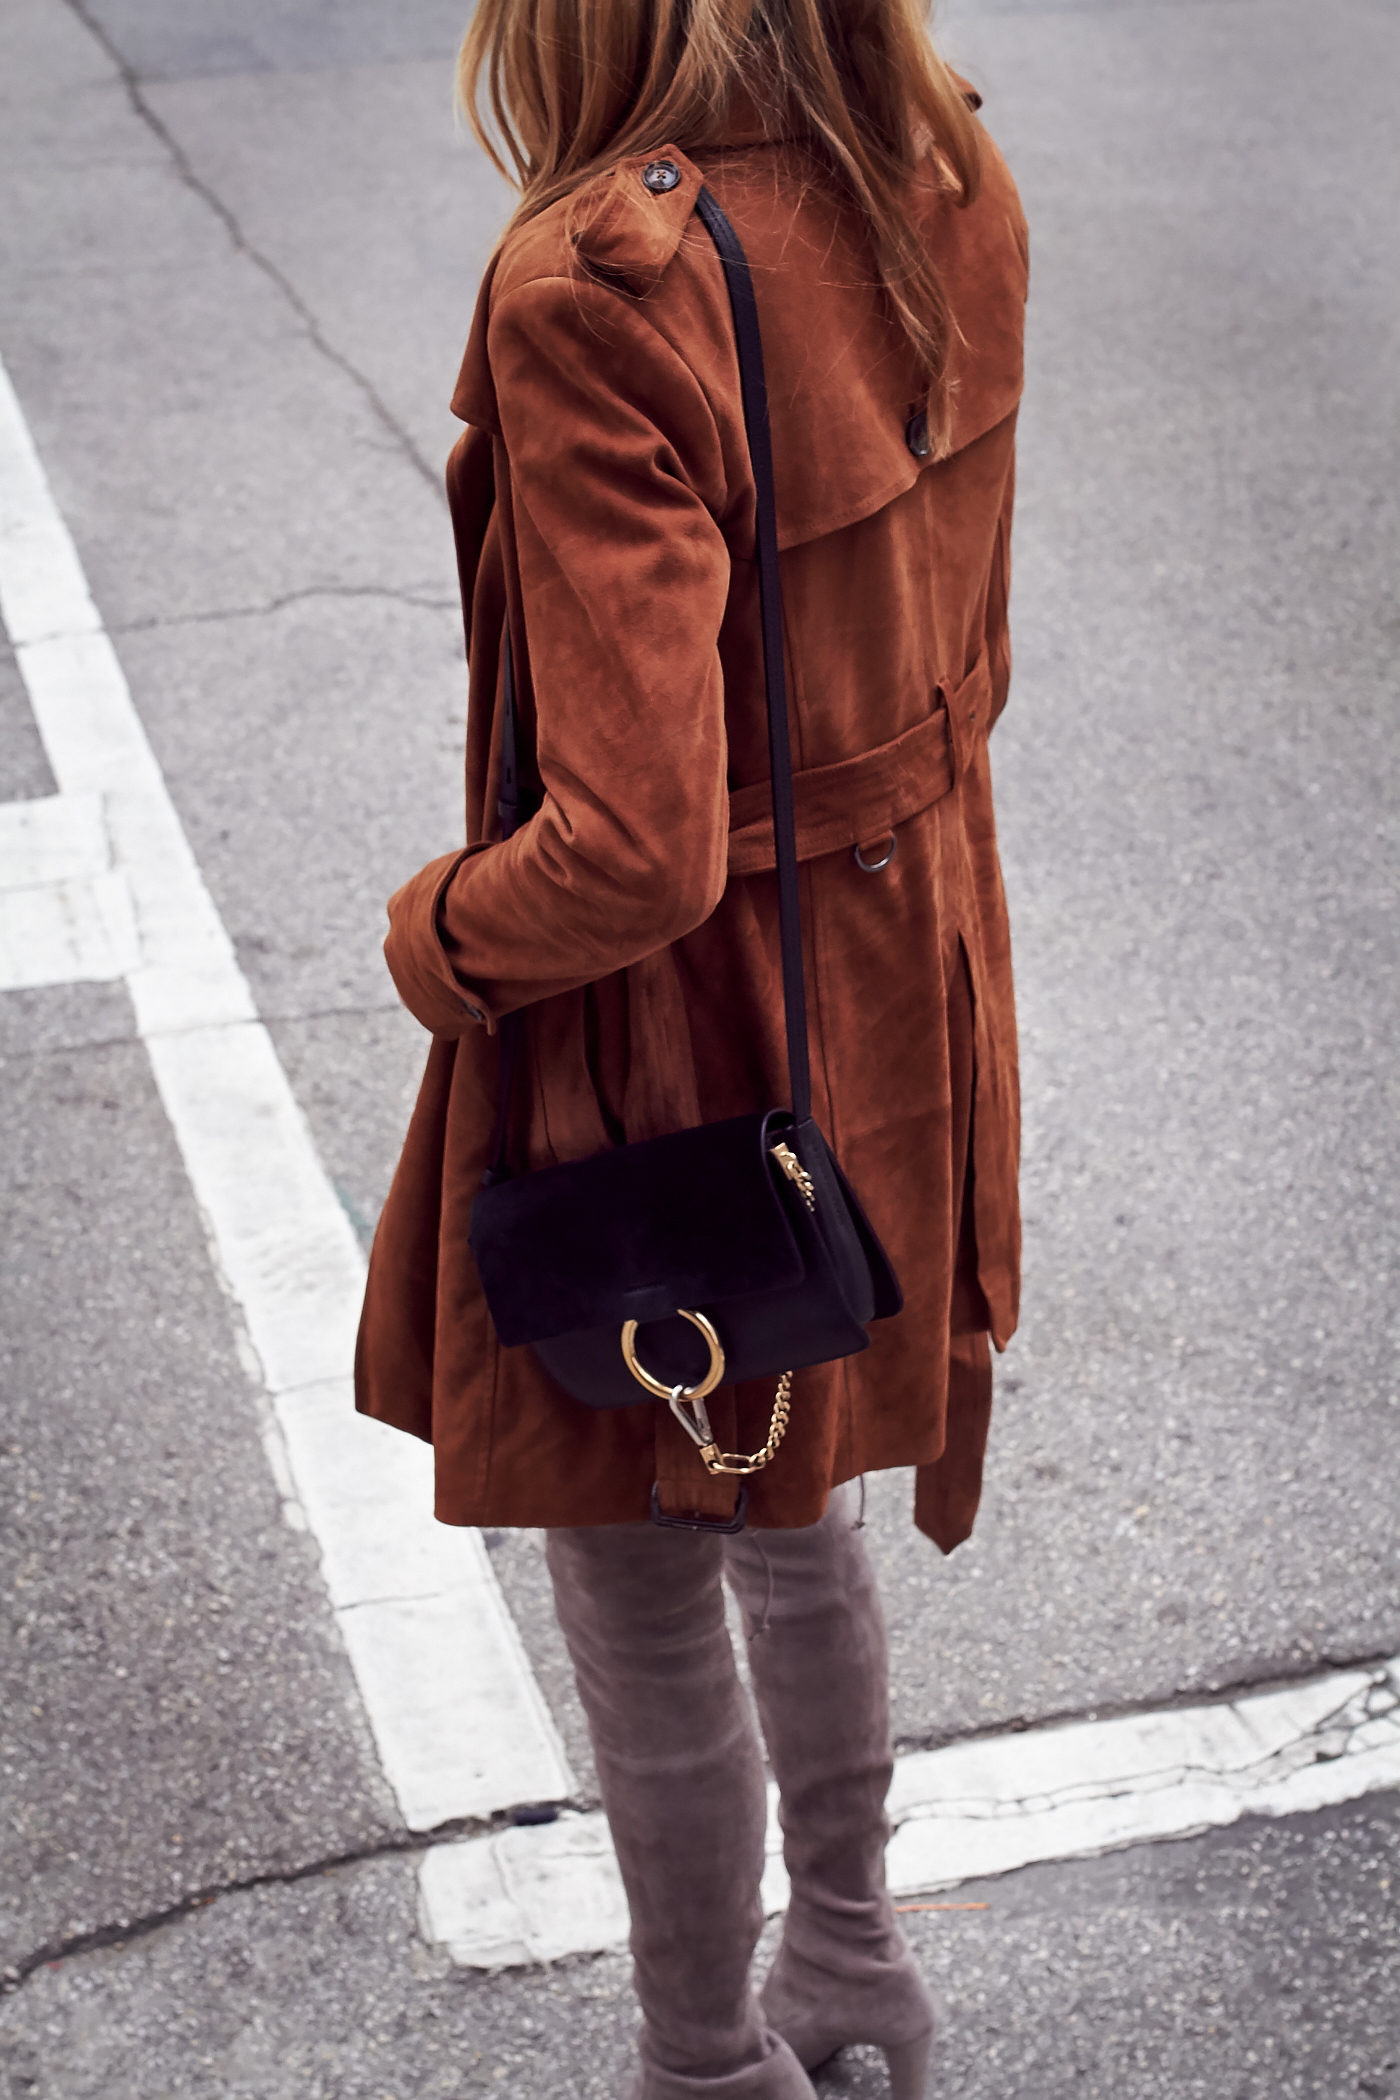 Fall Outfit, Tan Suede Trench Coat, Chloe Faye Handbag, Stuart Weitzman Highland Over-the-Knee Boots